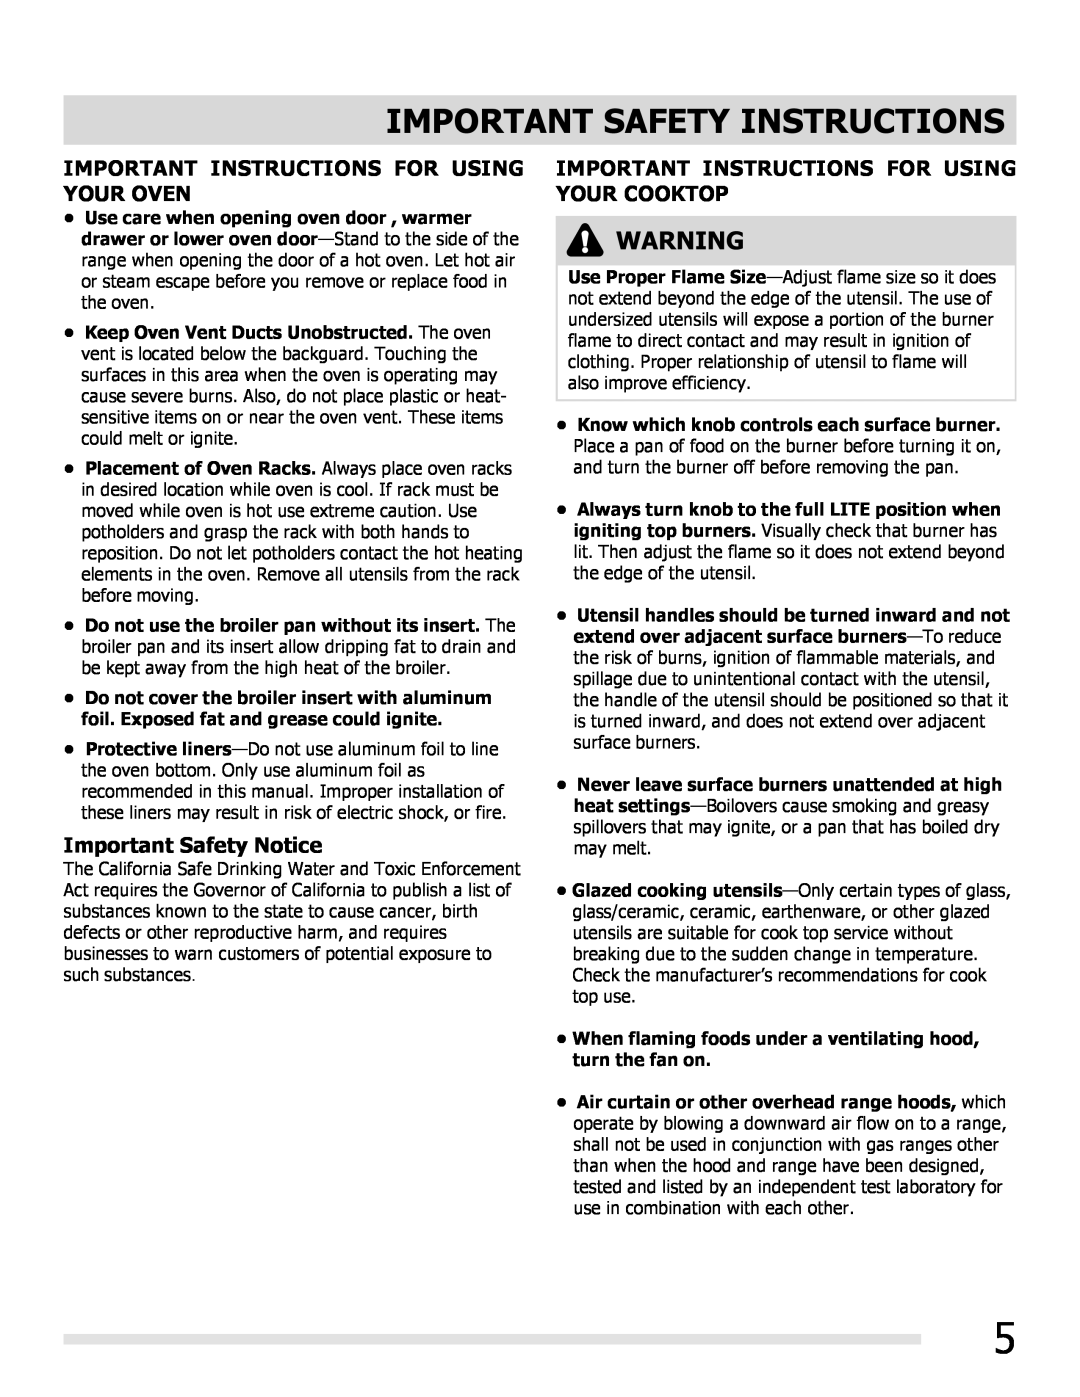 Frigidaire FGGF3032MF Important Instructions For Using Your Oven, Important Safety Notice, Important Safety Instructions 